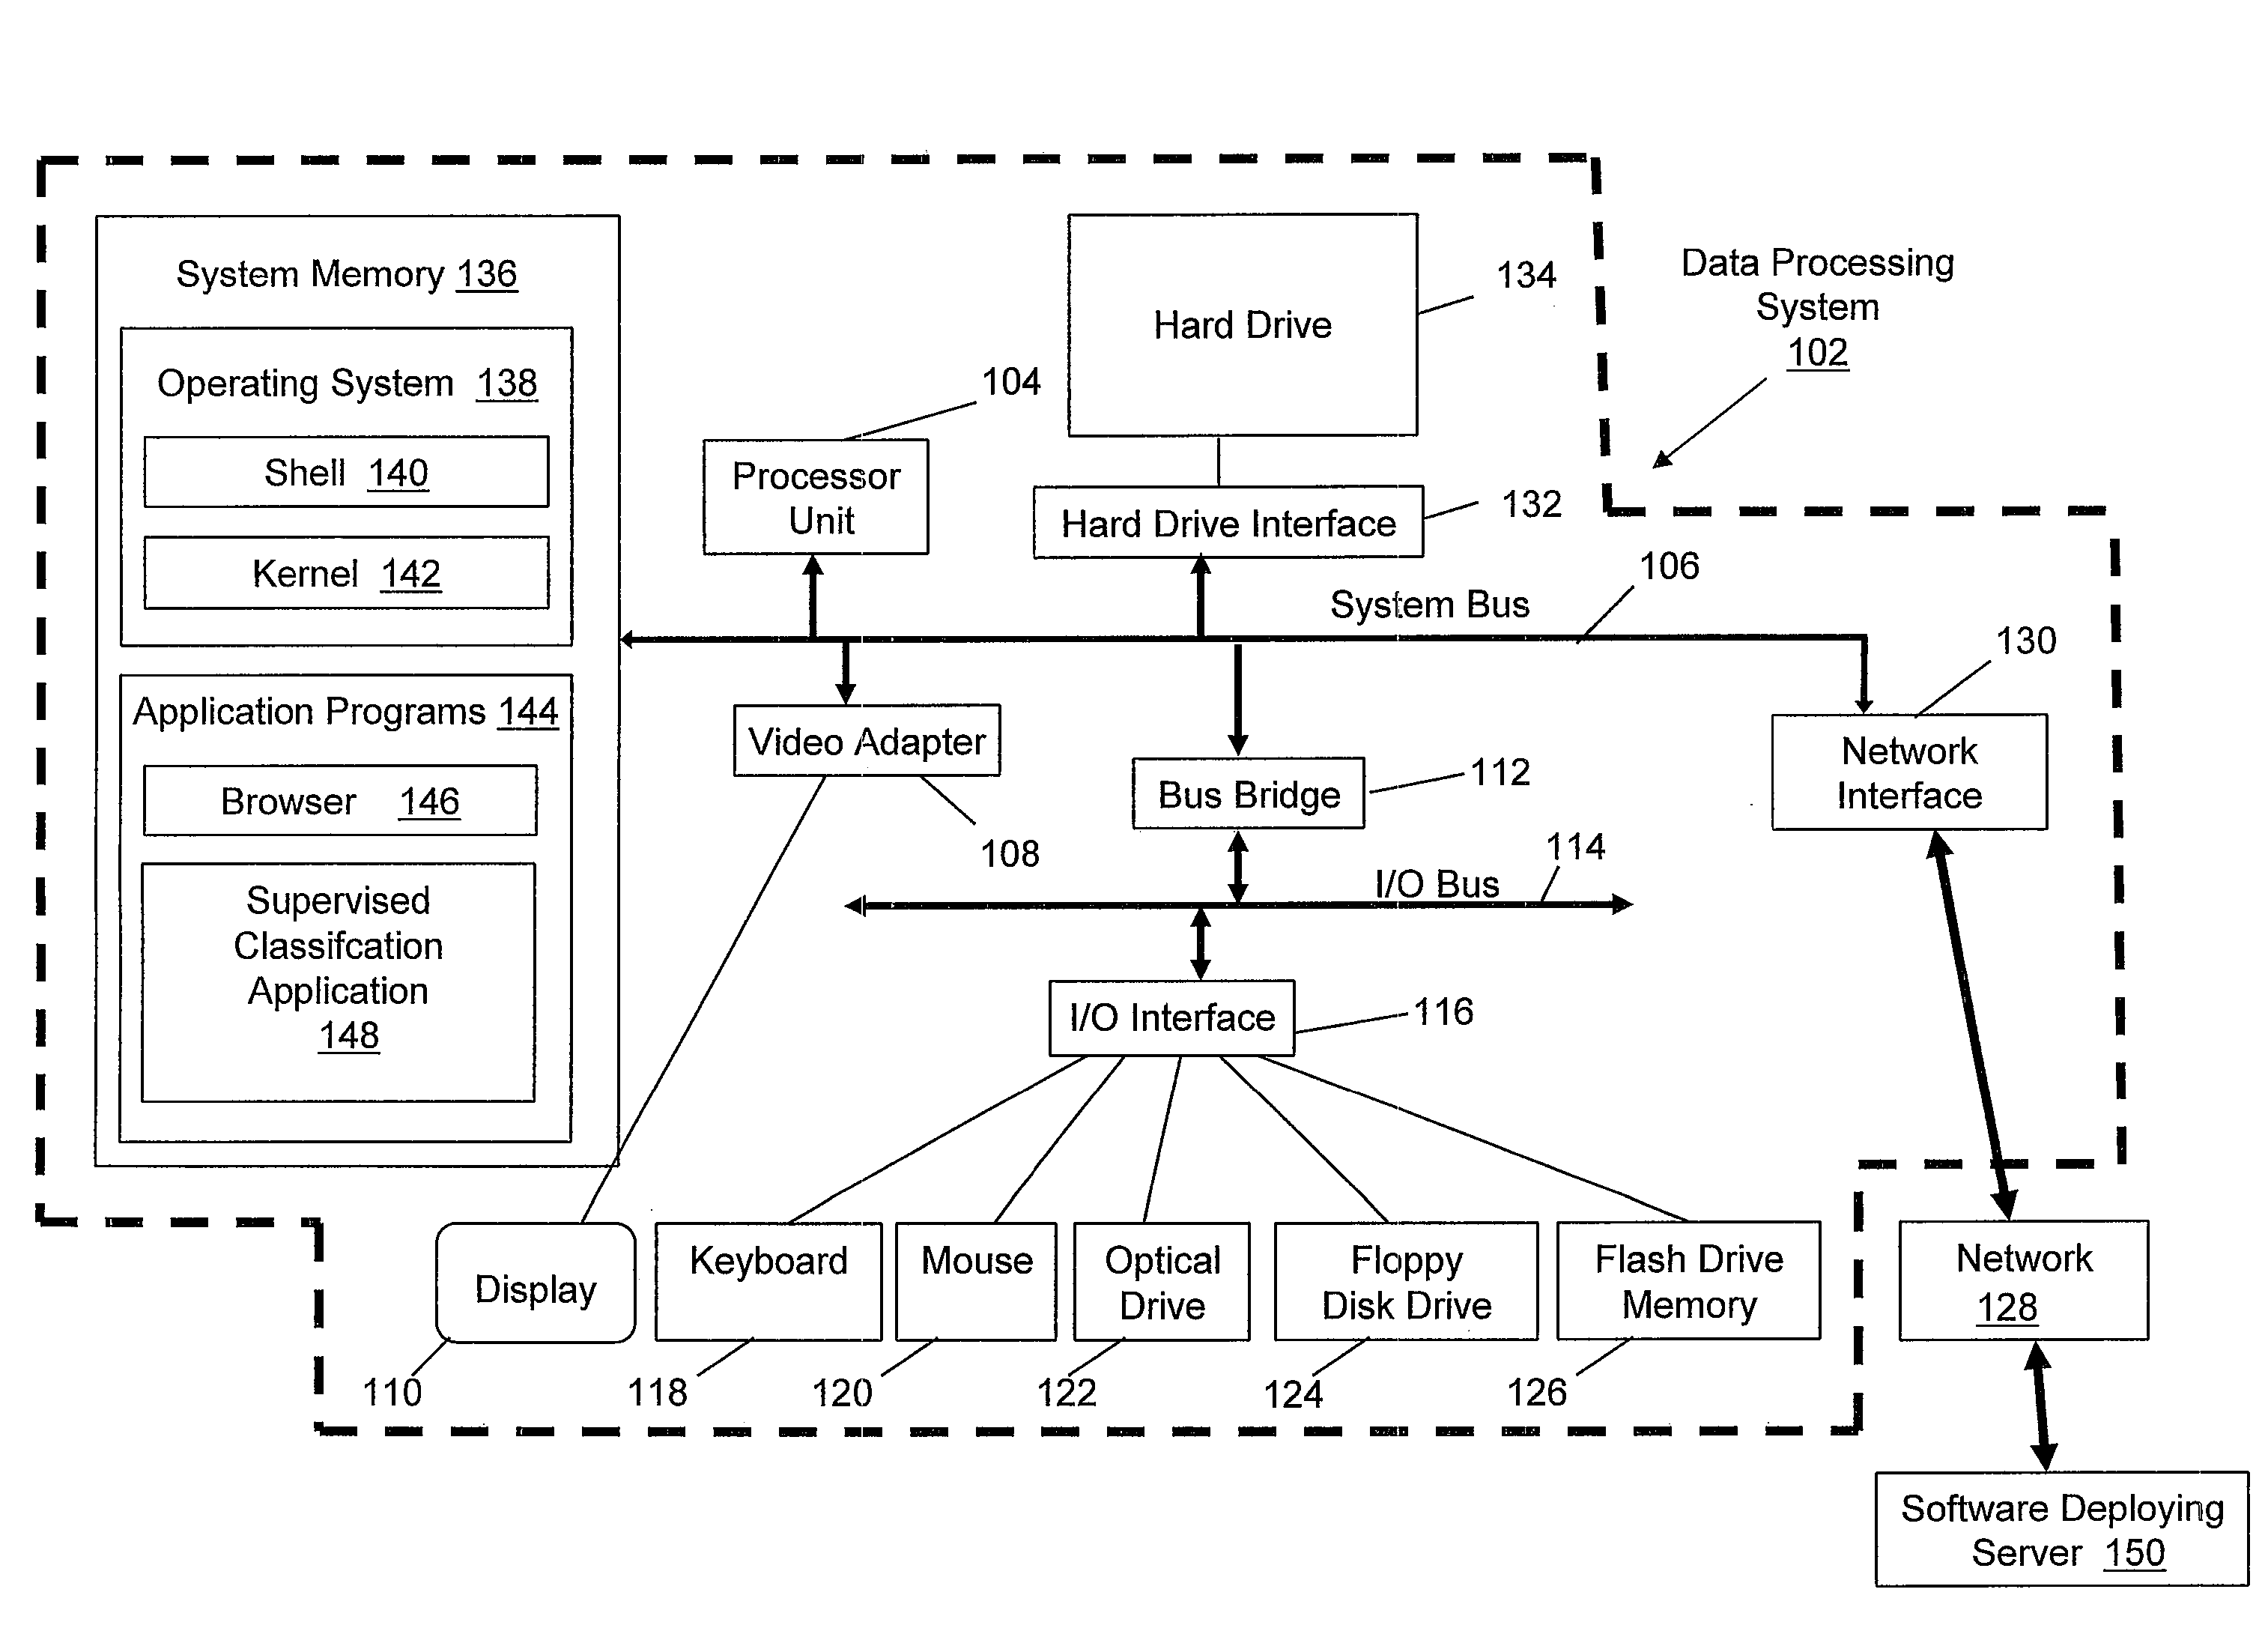 Computer-based method and system for efficient categorizing of digital documents